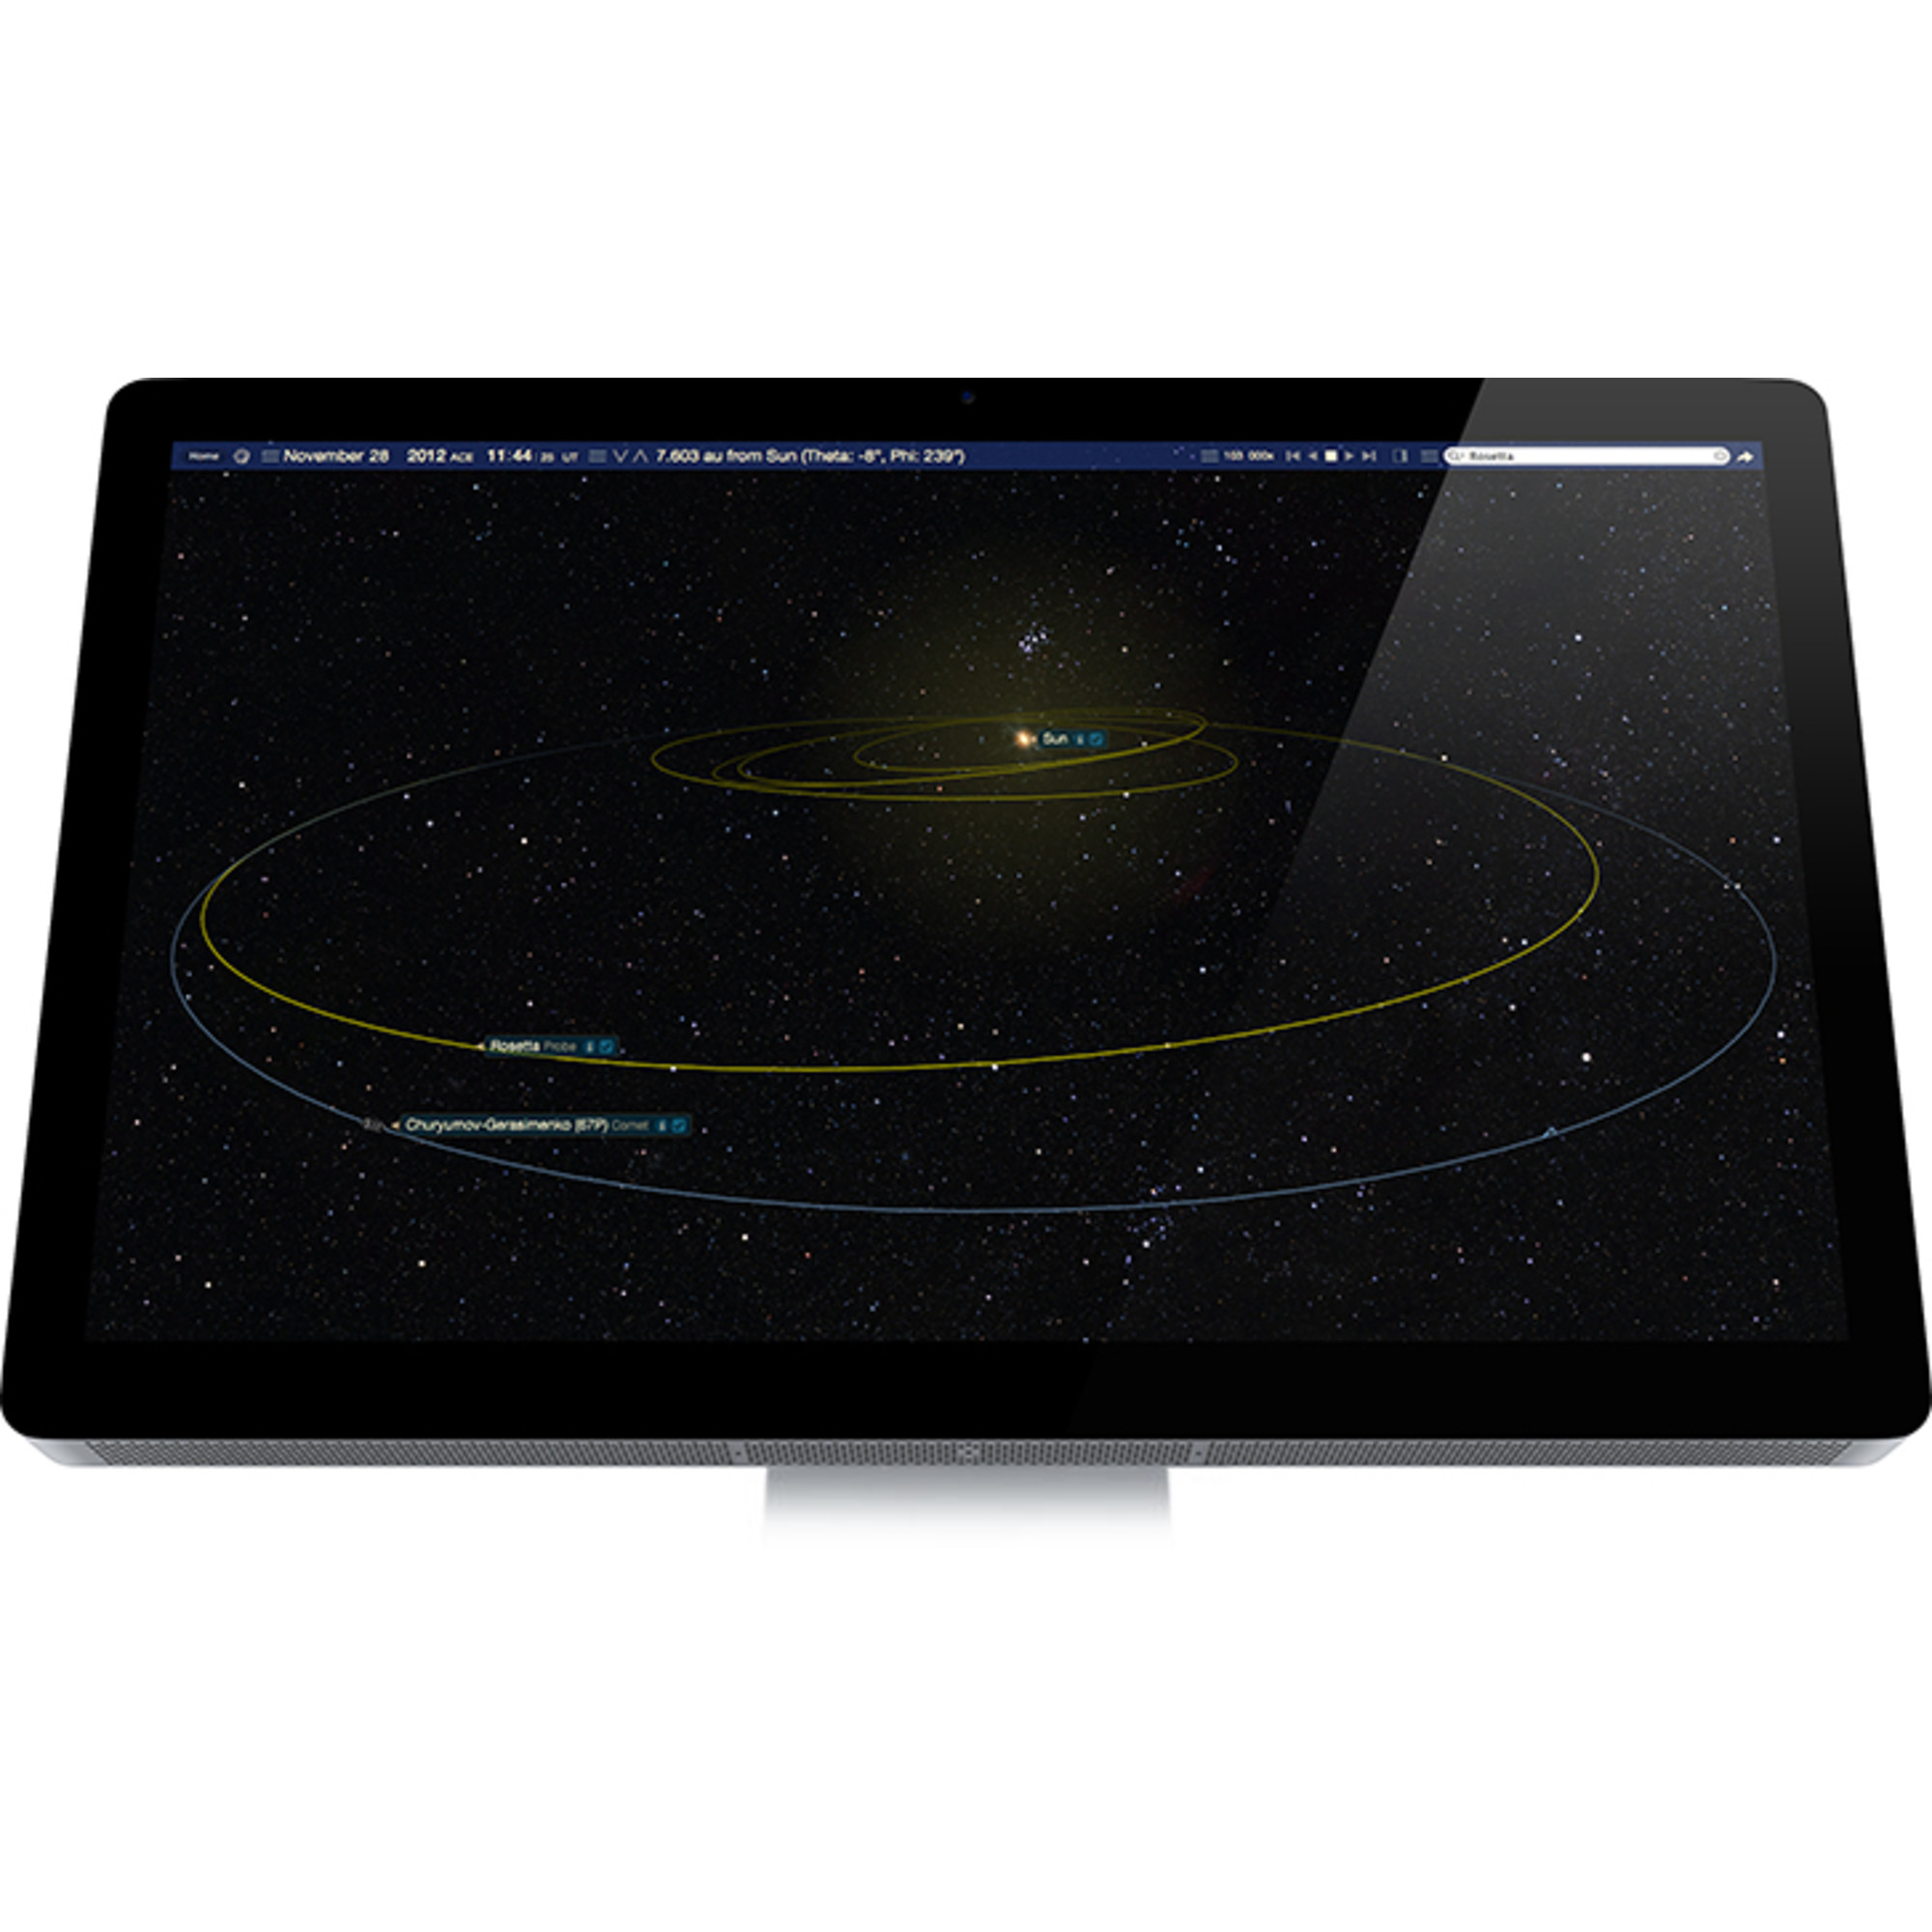 astronomy software starry night